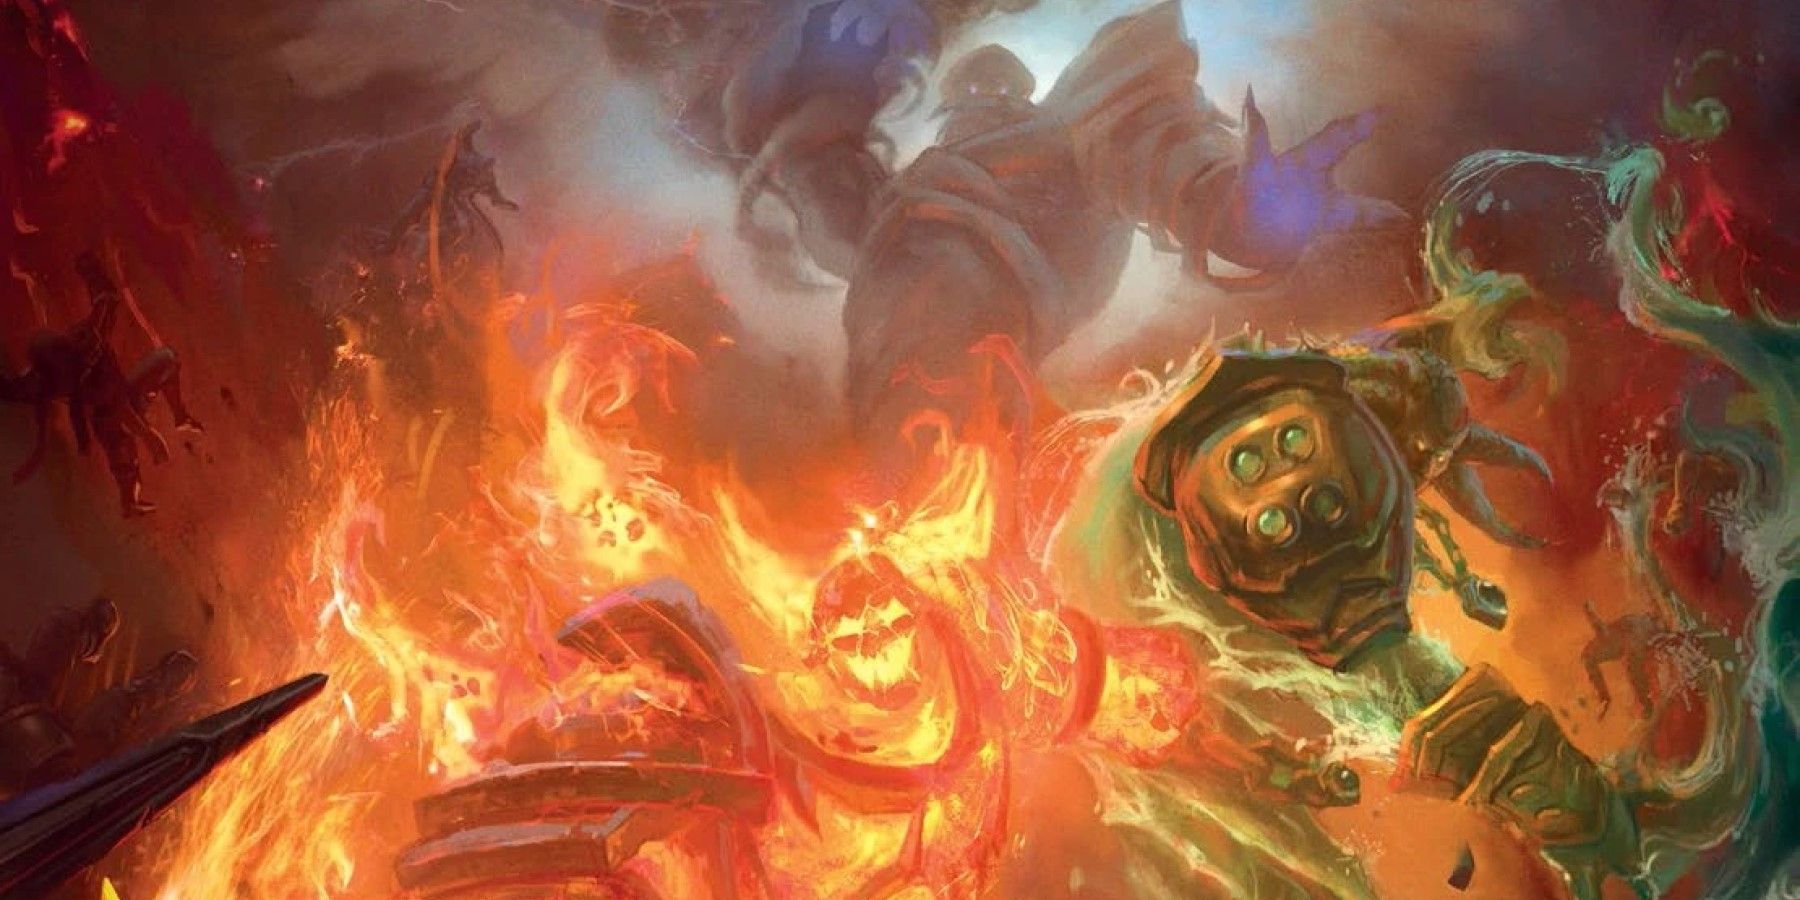 ragnaros al'akir and neptulon during the black empire of world of warcraft